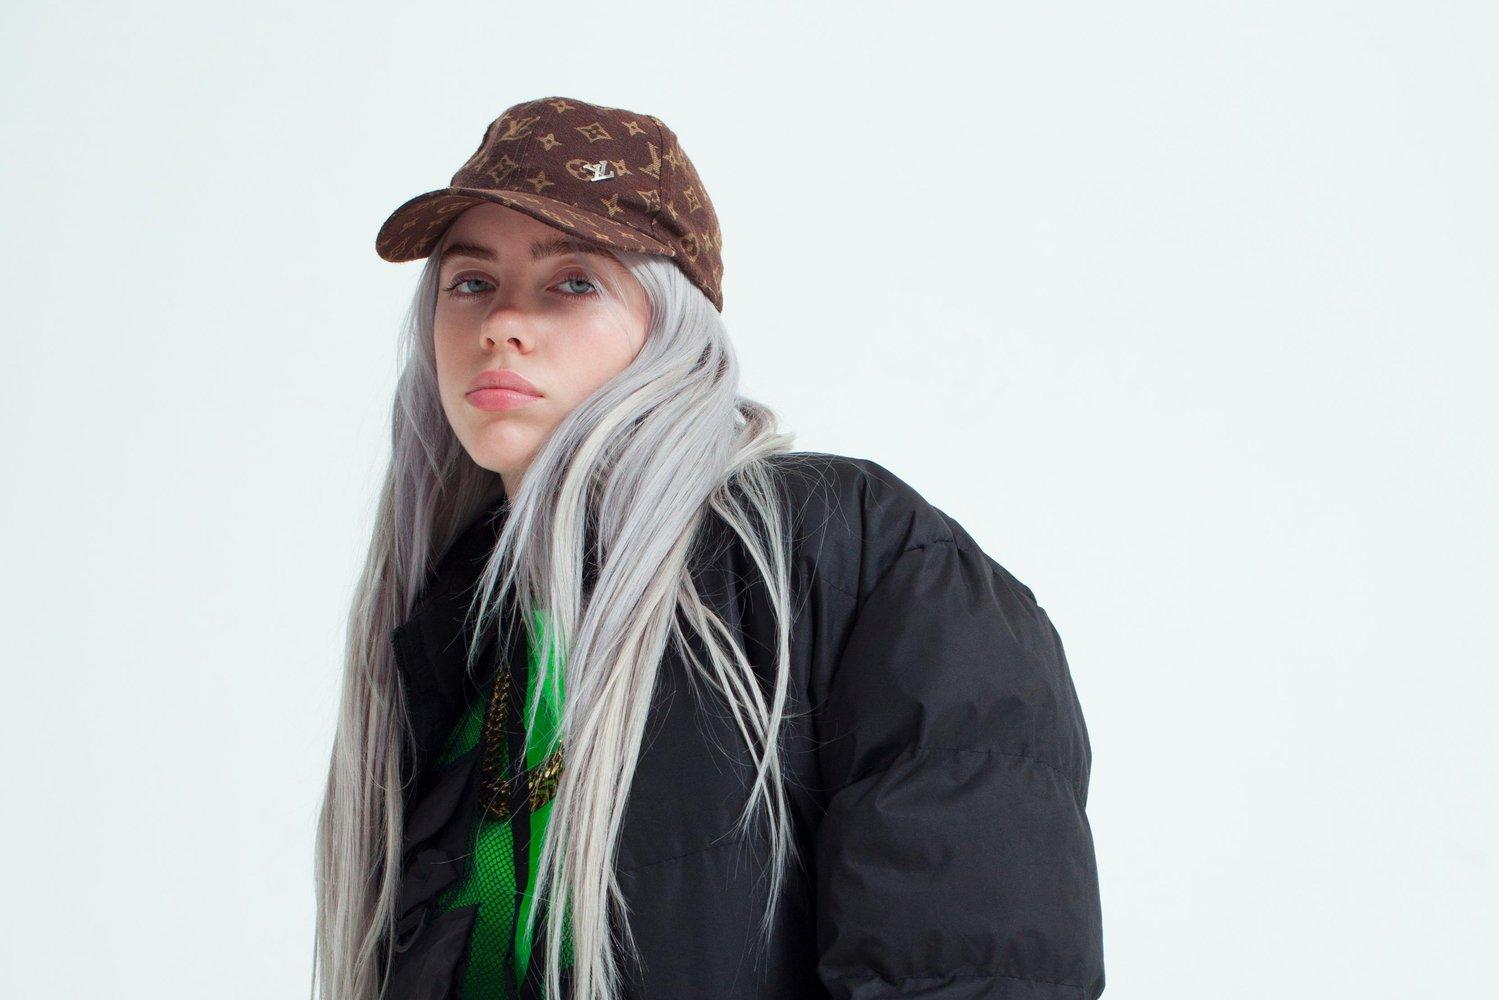 Billie Eilish: 5 Songs You Need To Know Right Now